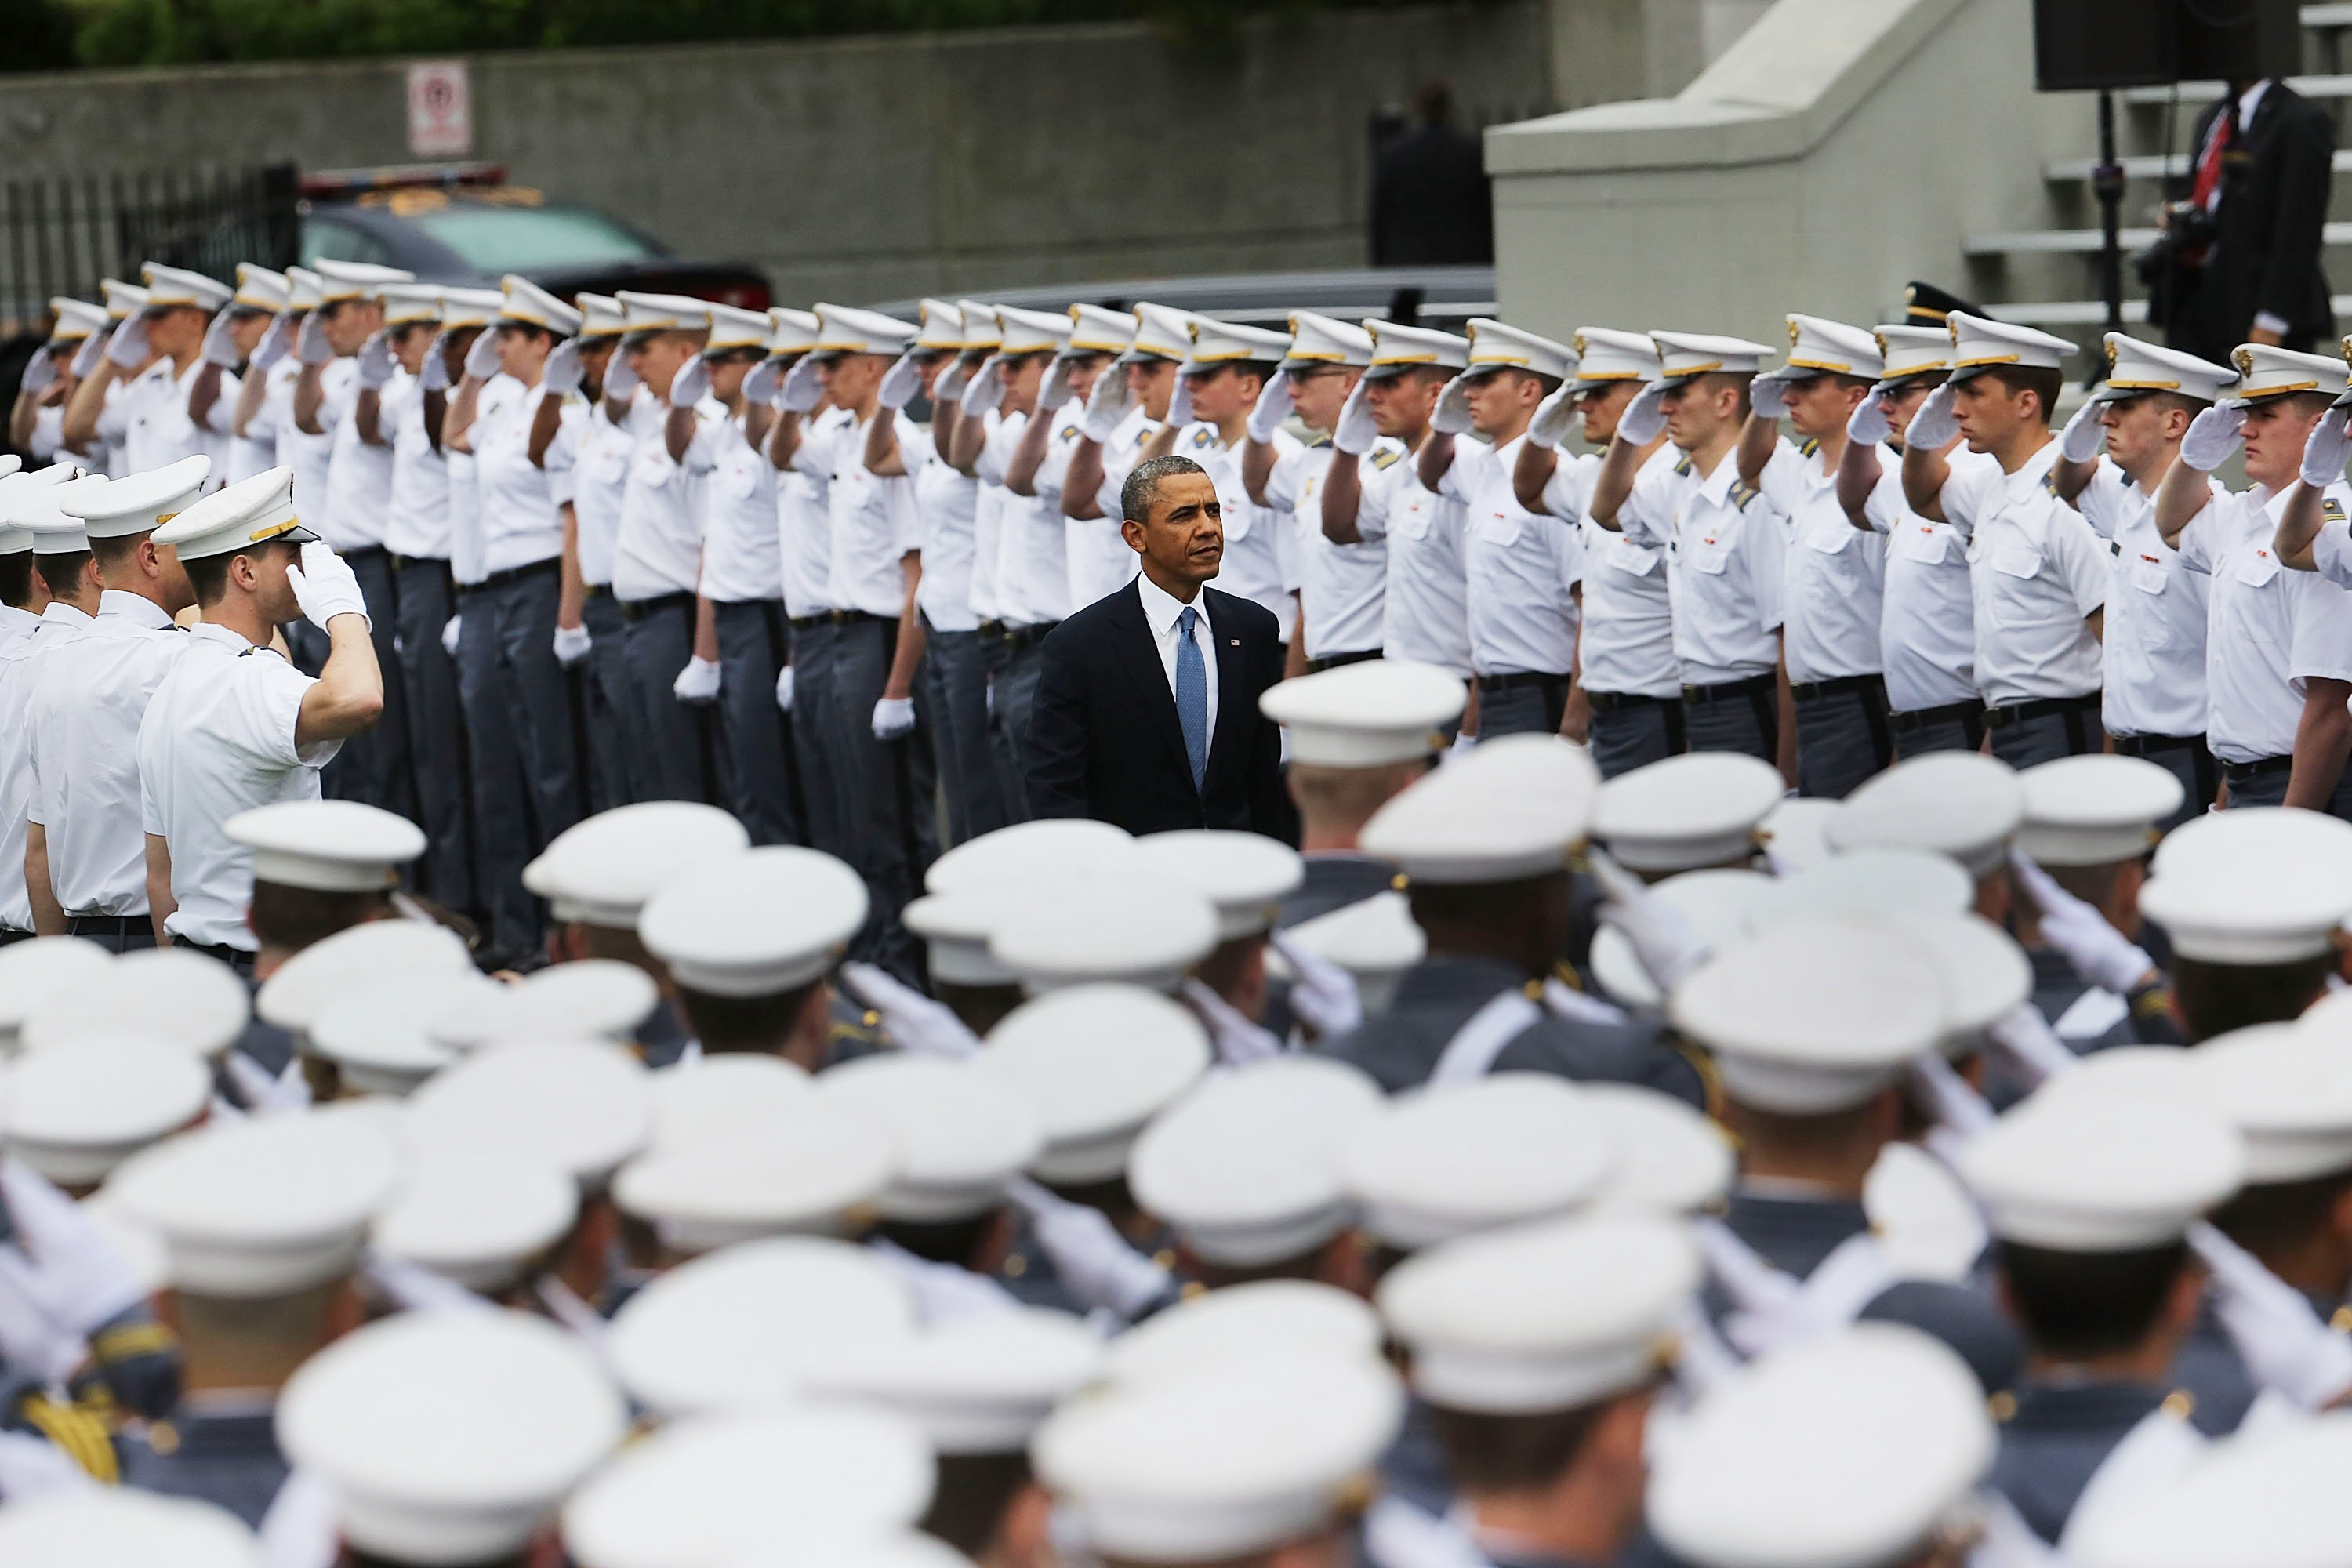 President Barack Obama enters the stadium at West Point to give the commencement address at the graduation ceremony at the U.S. Military Academy on May 28, 2014 in West Point, N.Y. (Spencer Platt—Getty Images)